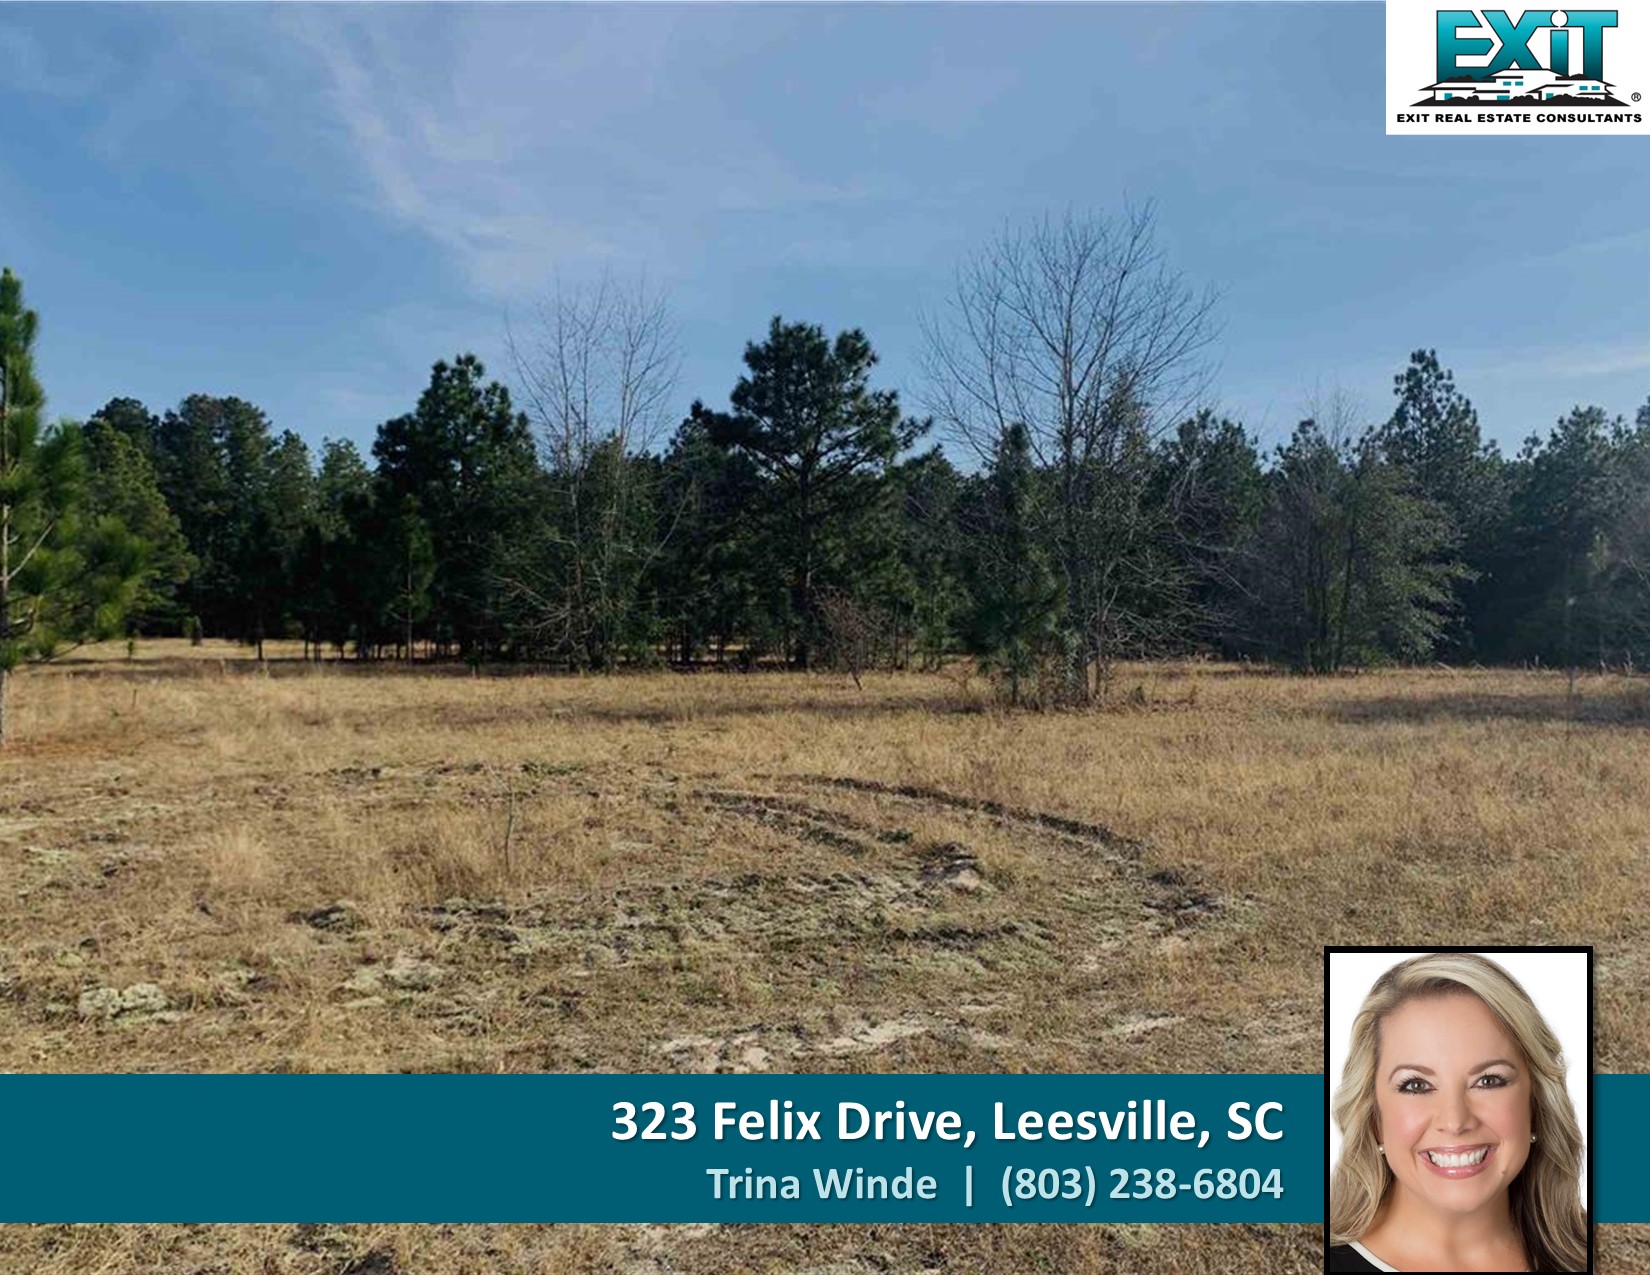 Just listed in Leesville